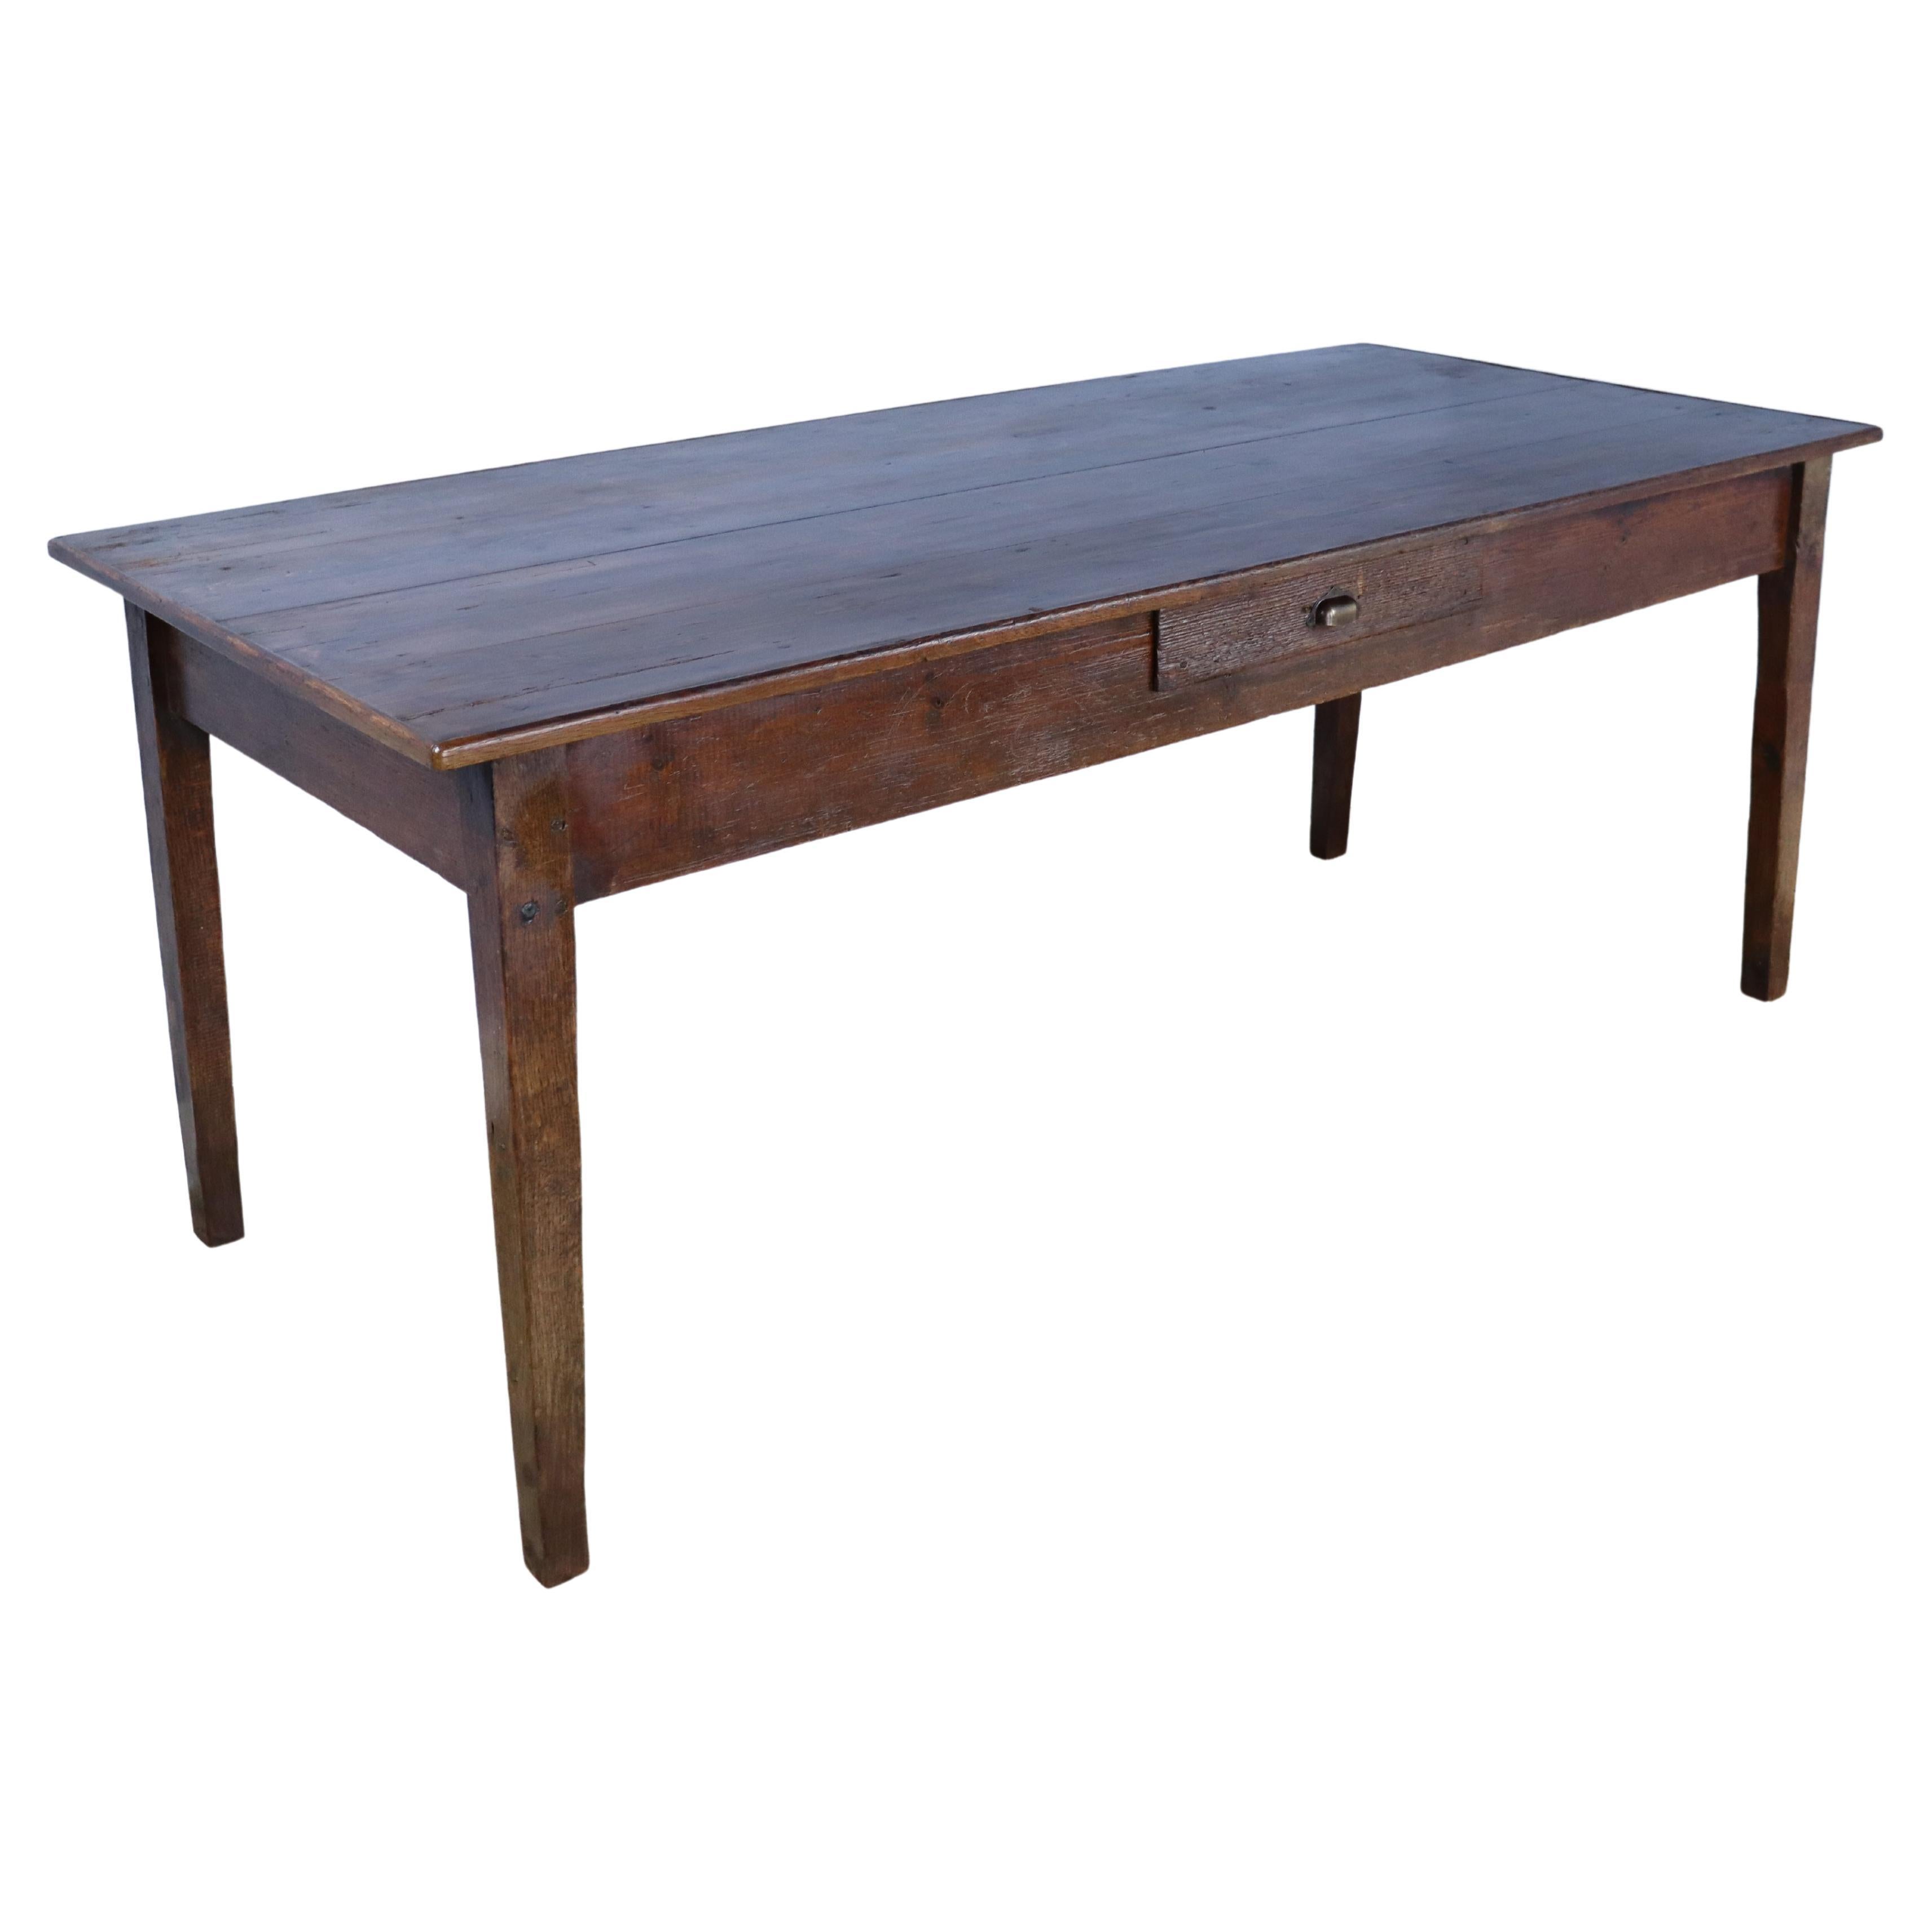 French Farm Table with Chestnut Base, Pine Top with Decorative Edge